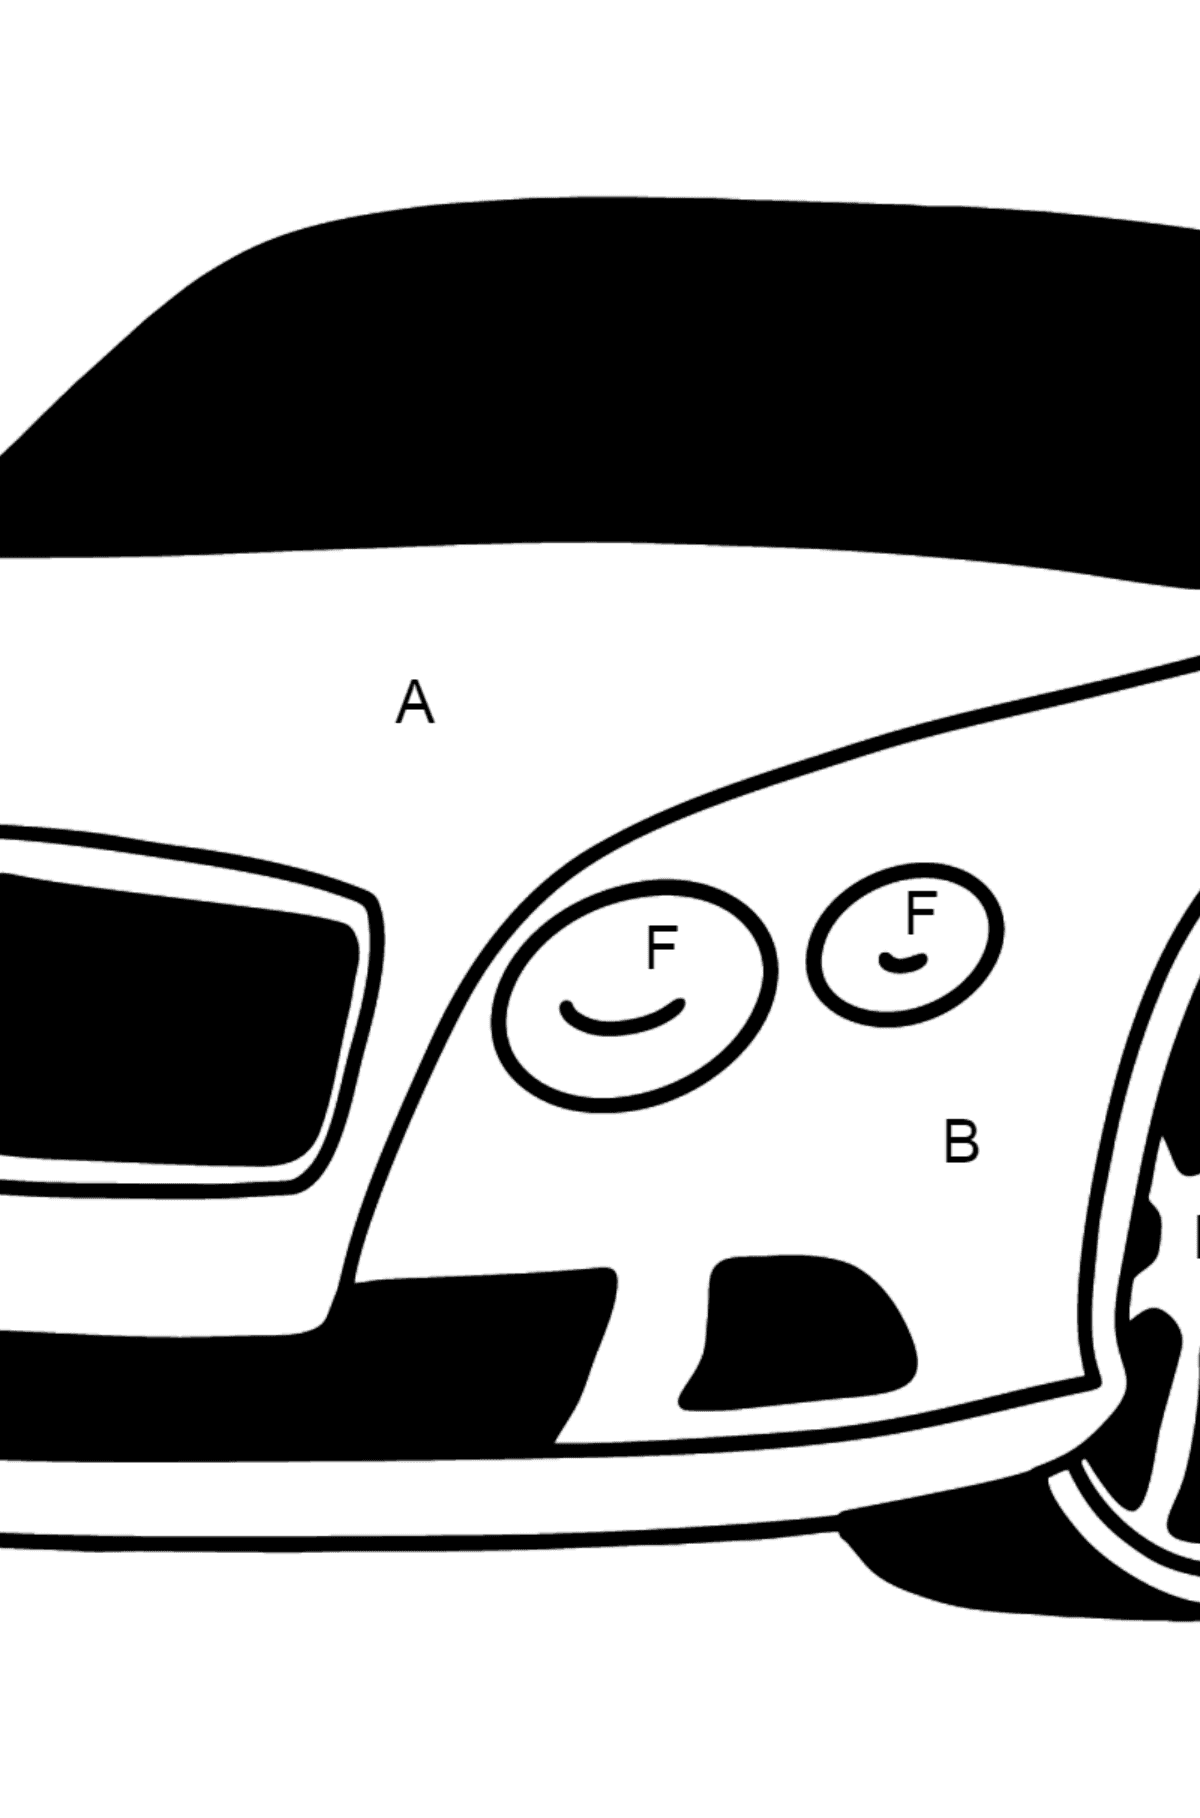 Bentley Continental GT Car coloring page - Coloring by Letters for Kids